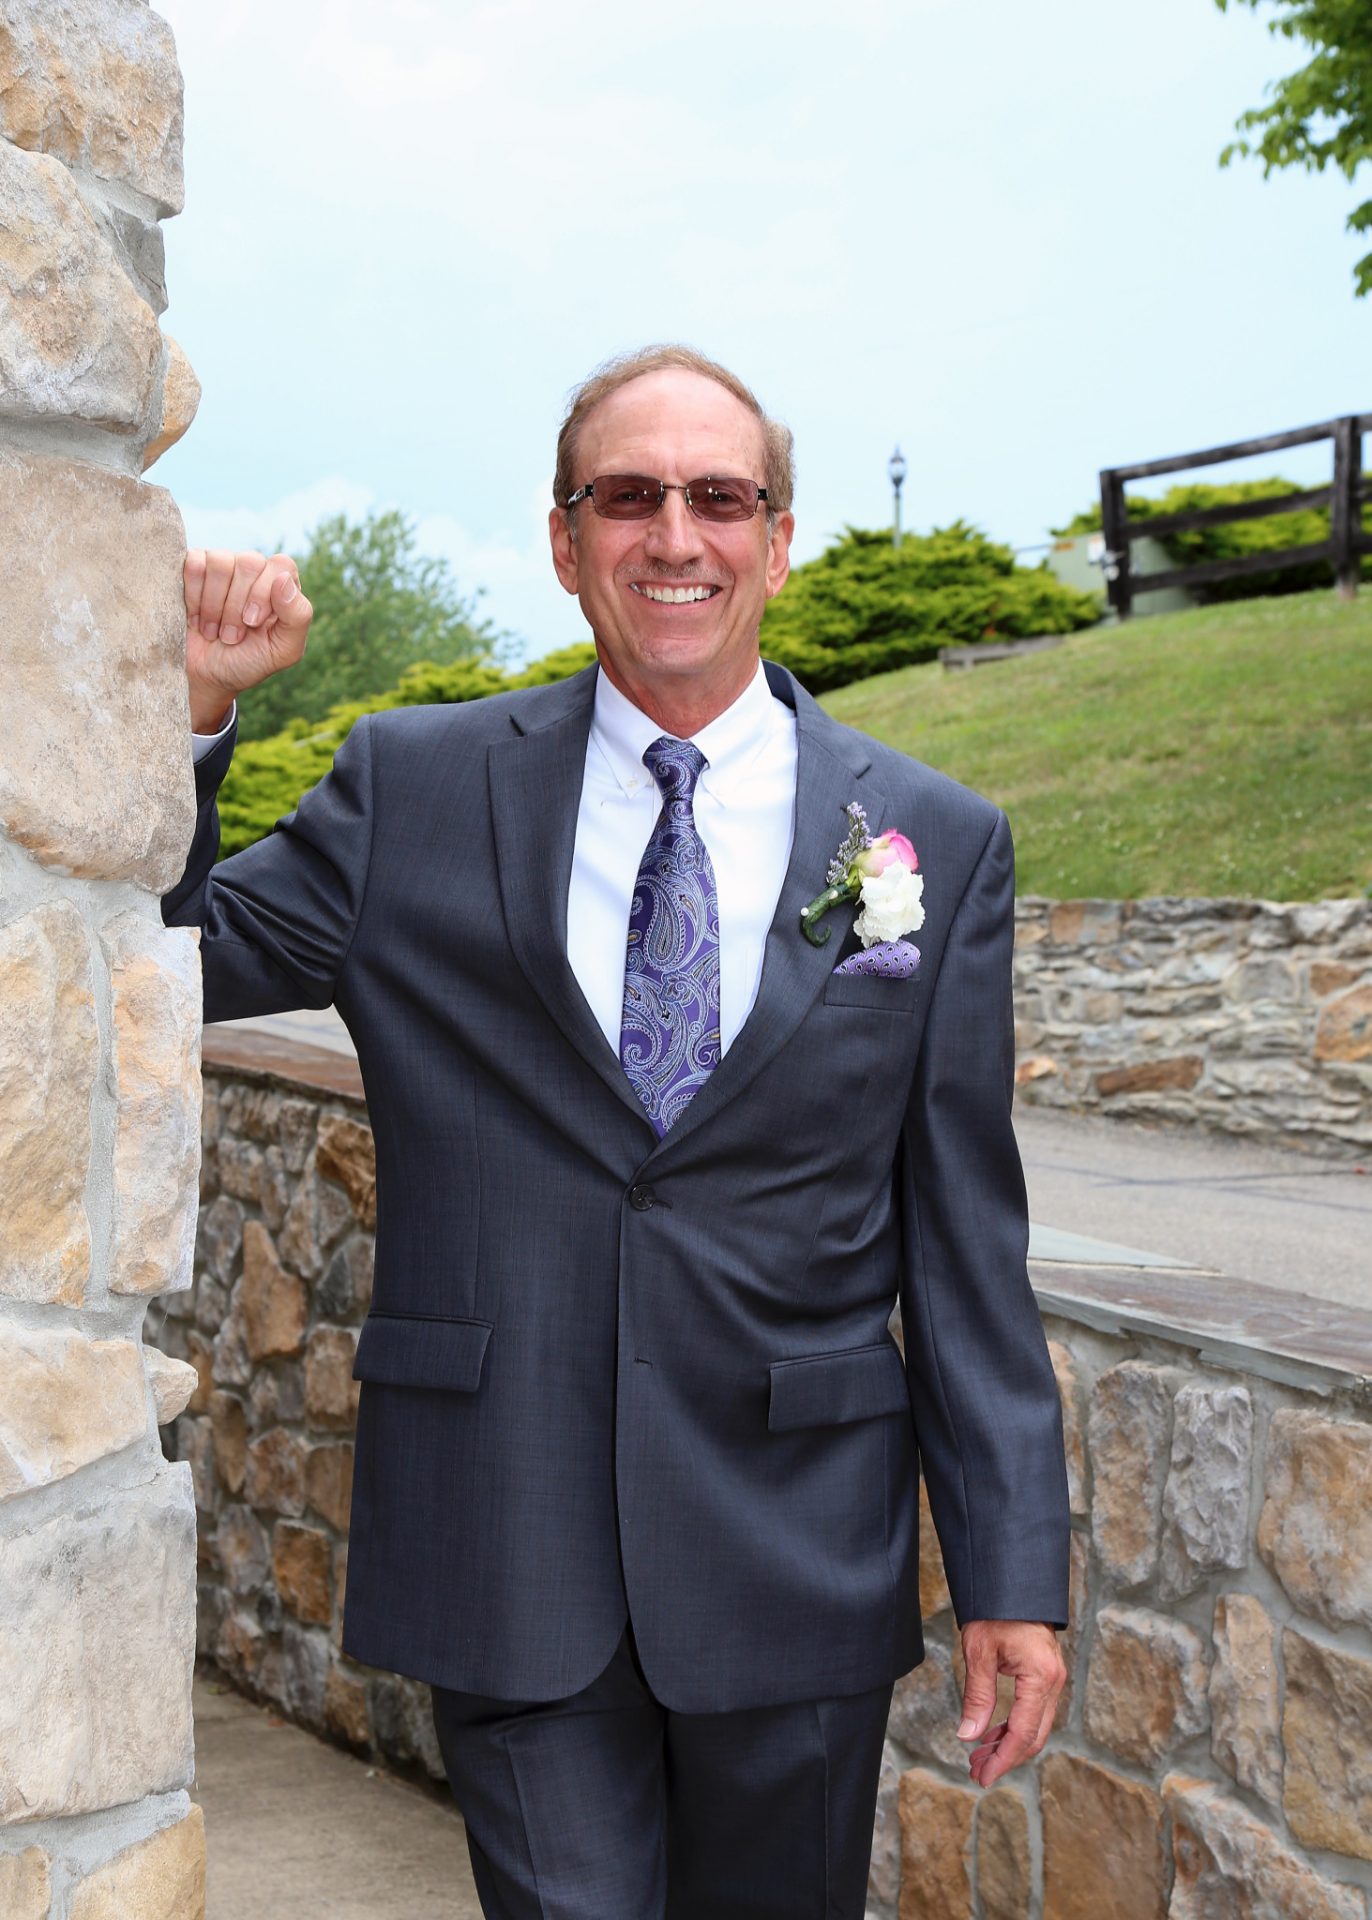 Groom poses by the stone wall in the back of Morningside In before the wedding ceremony on the outdoor pavilion